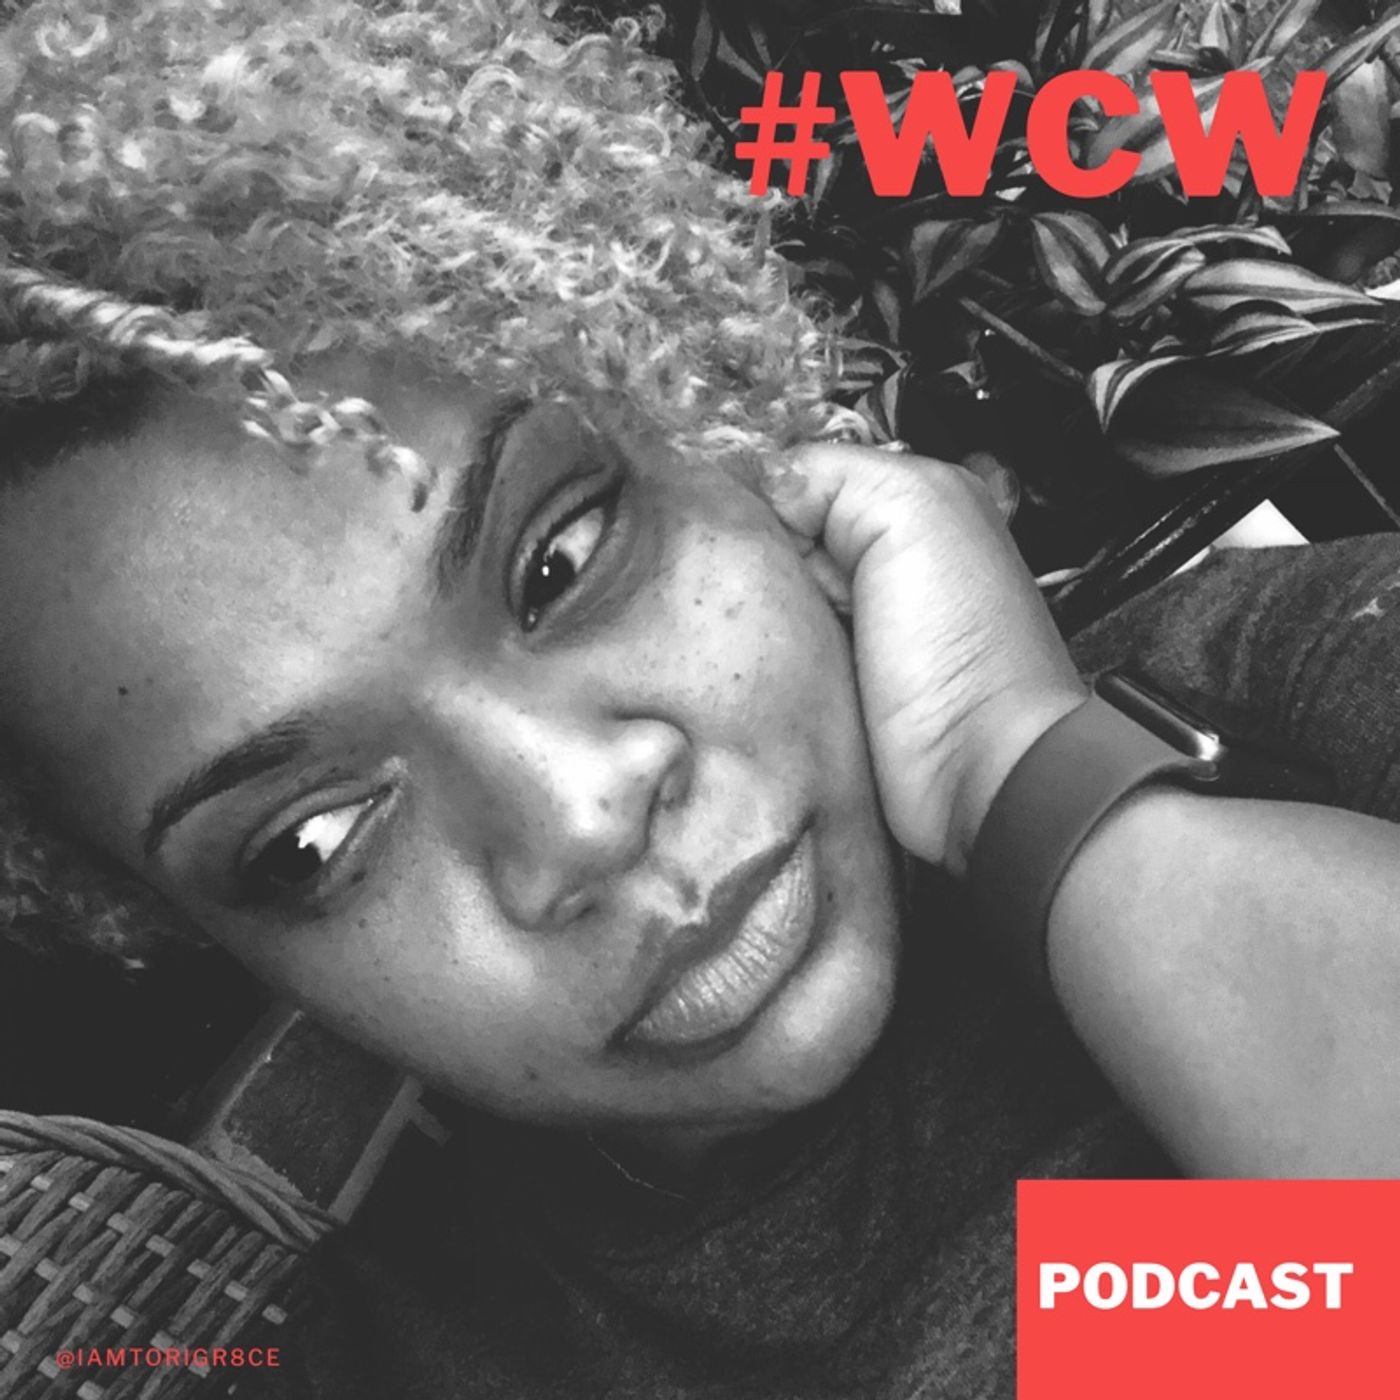 My very first episode with Spreaker Studio #WCW